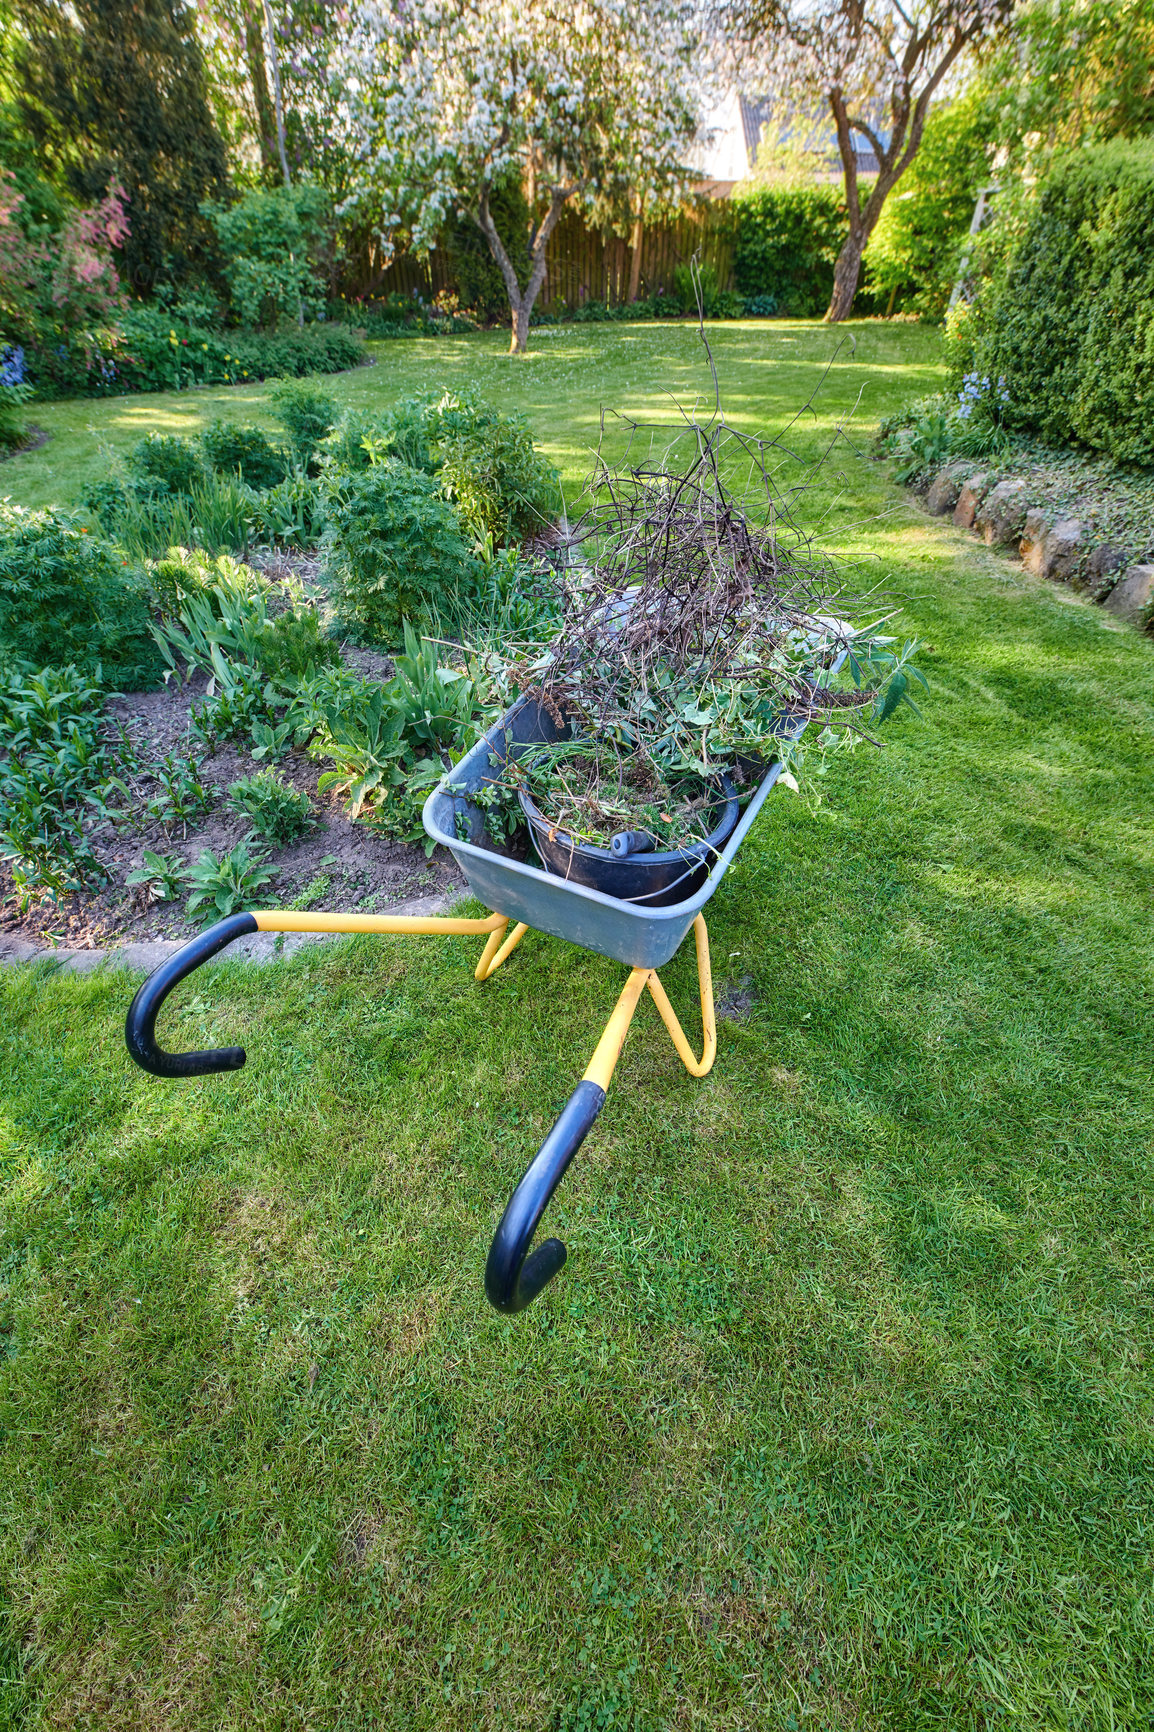 Buy stock photo A wheelbarrow full of plants in a green garden from above. Maintenance equipment on a clean well maintained lawn in a sunny backyard used for gardening, moving vegetations, dry leaves and branches